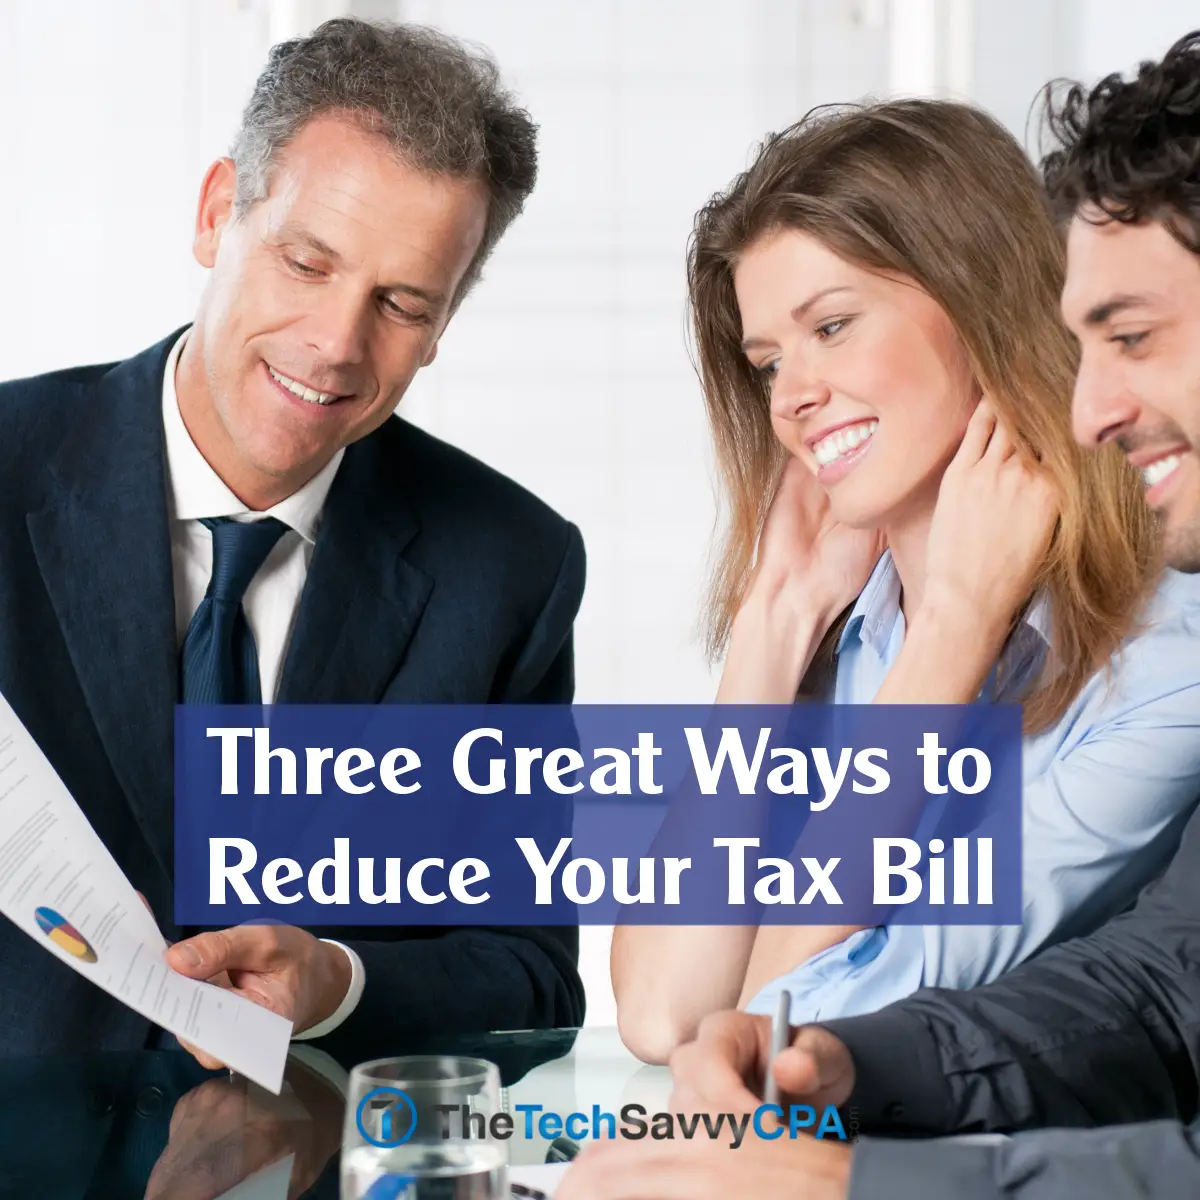 Three Great Ways to Reduce Your Tax Bill